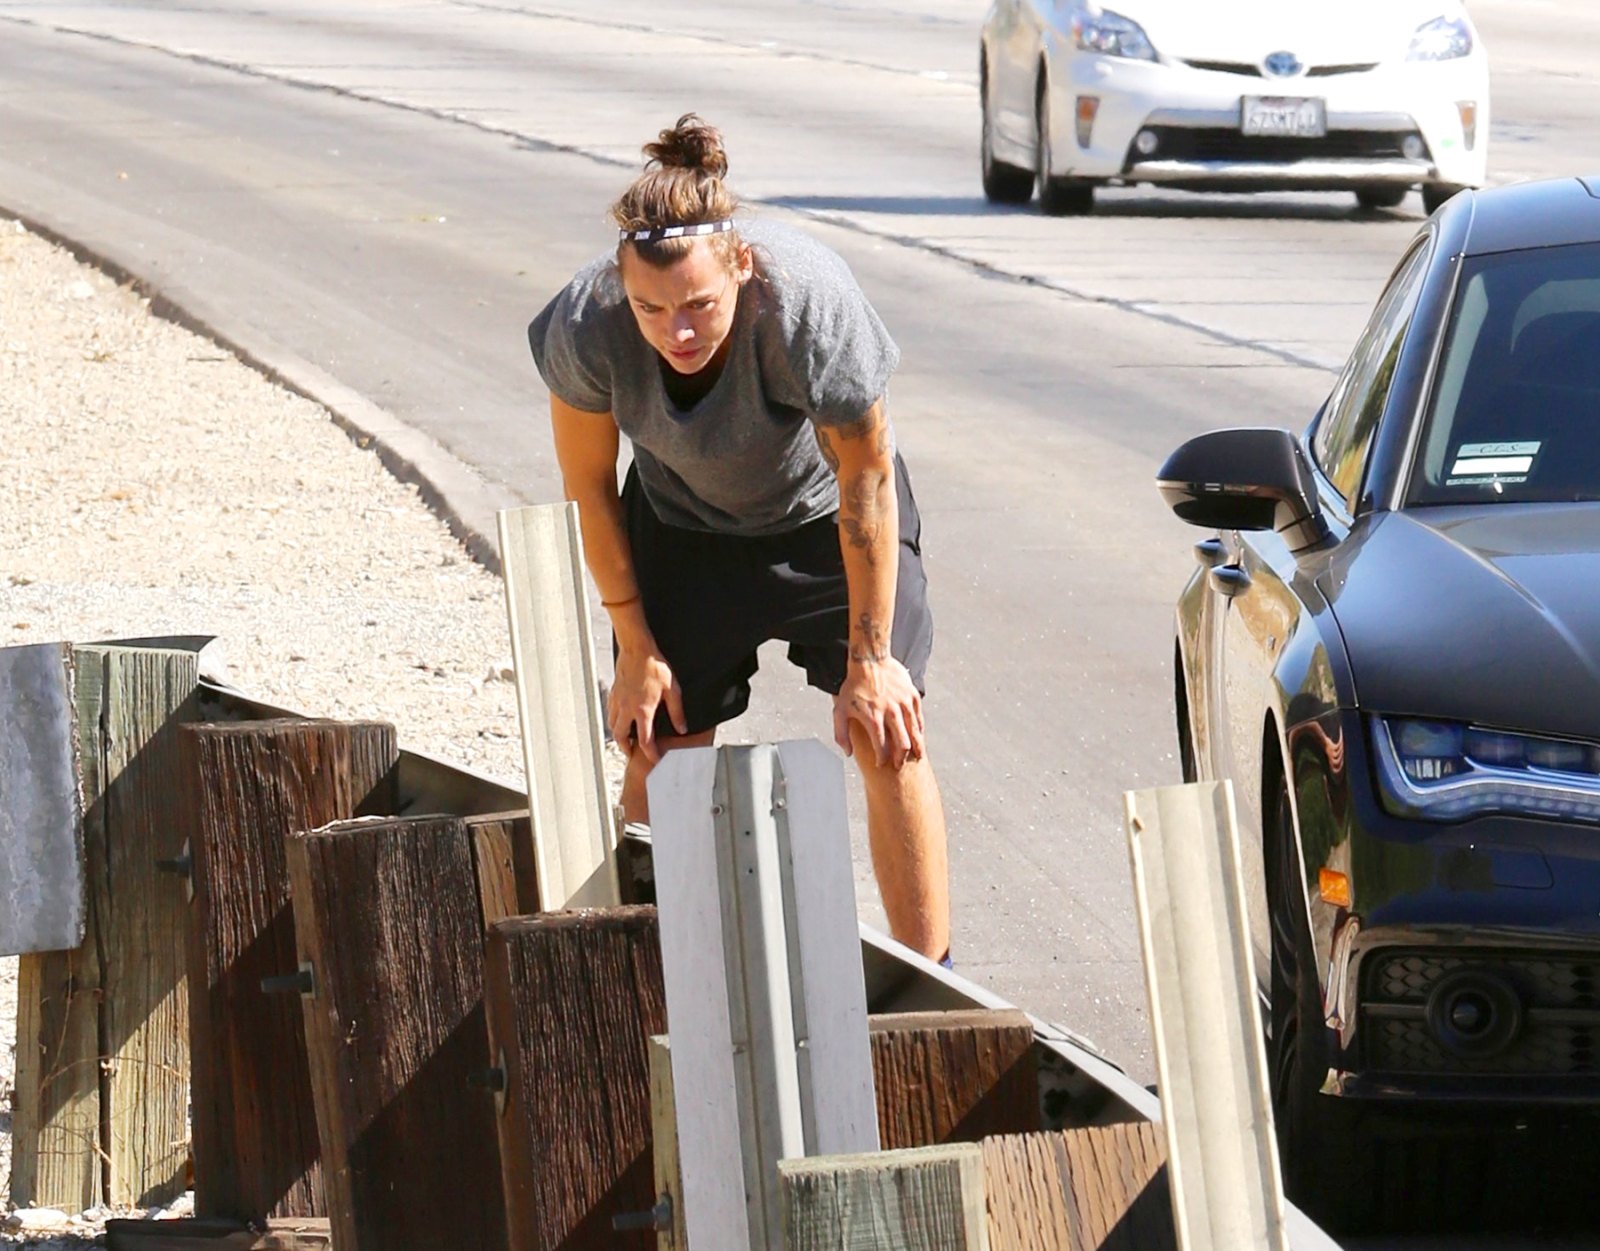 1441292376_harry styles puking on side of highway zoom